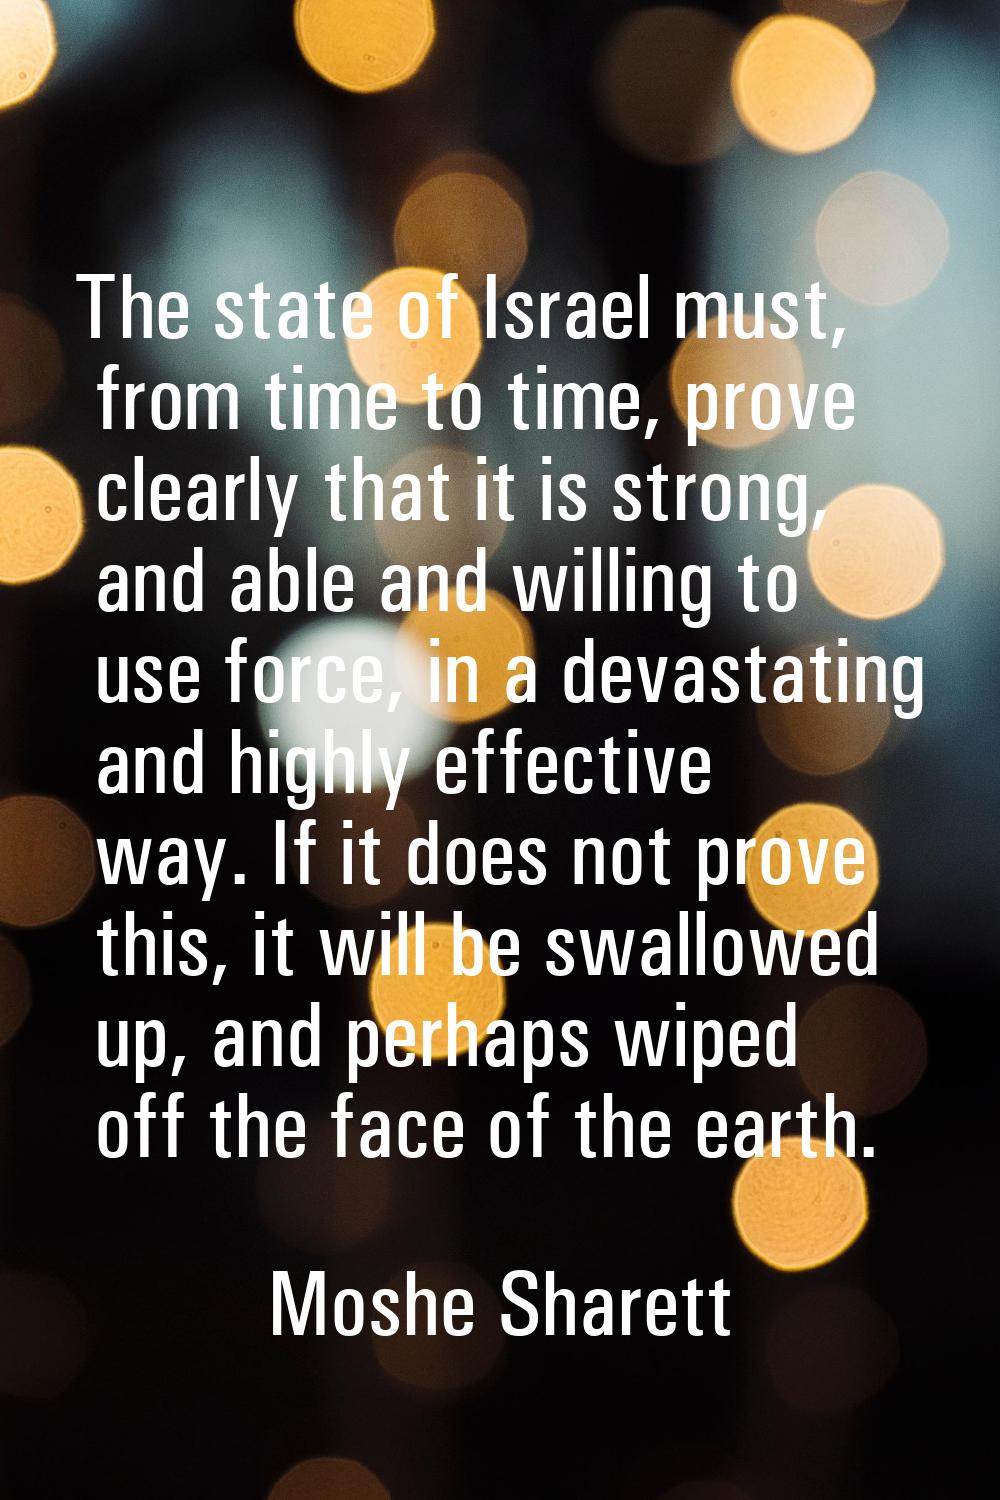 The state of Israel must, from time to time, prove clearly that it is strong, and able and willing 